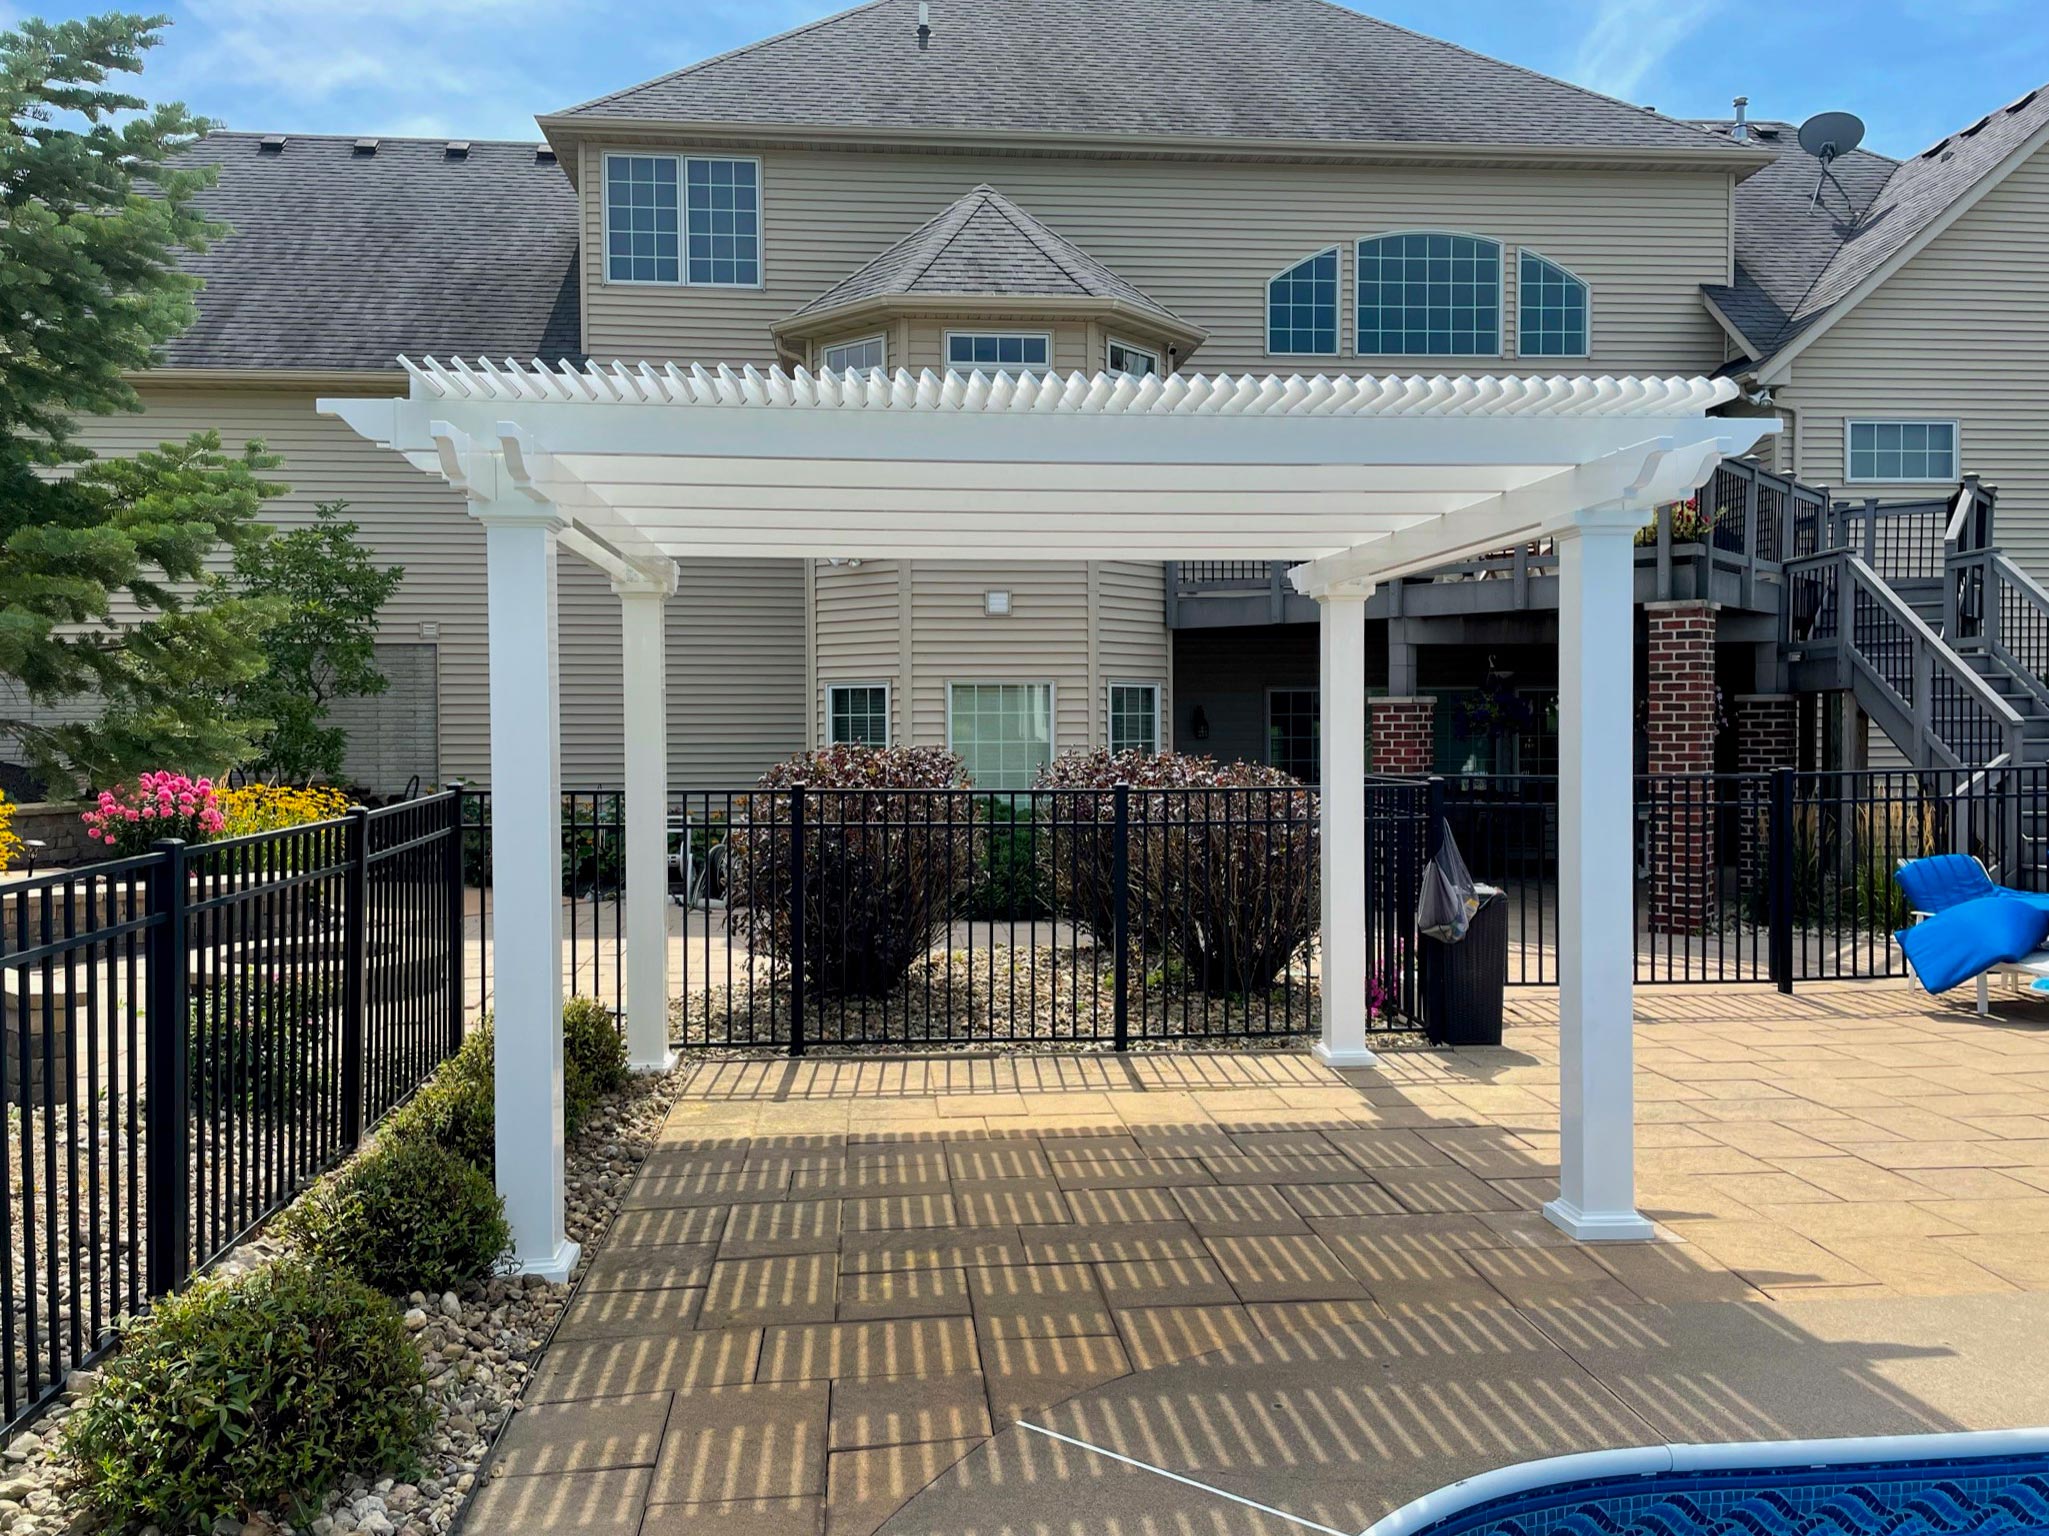 Vinyl pergola kit constructed over a pool side patio creating shade below